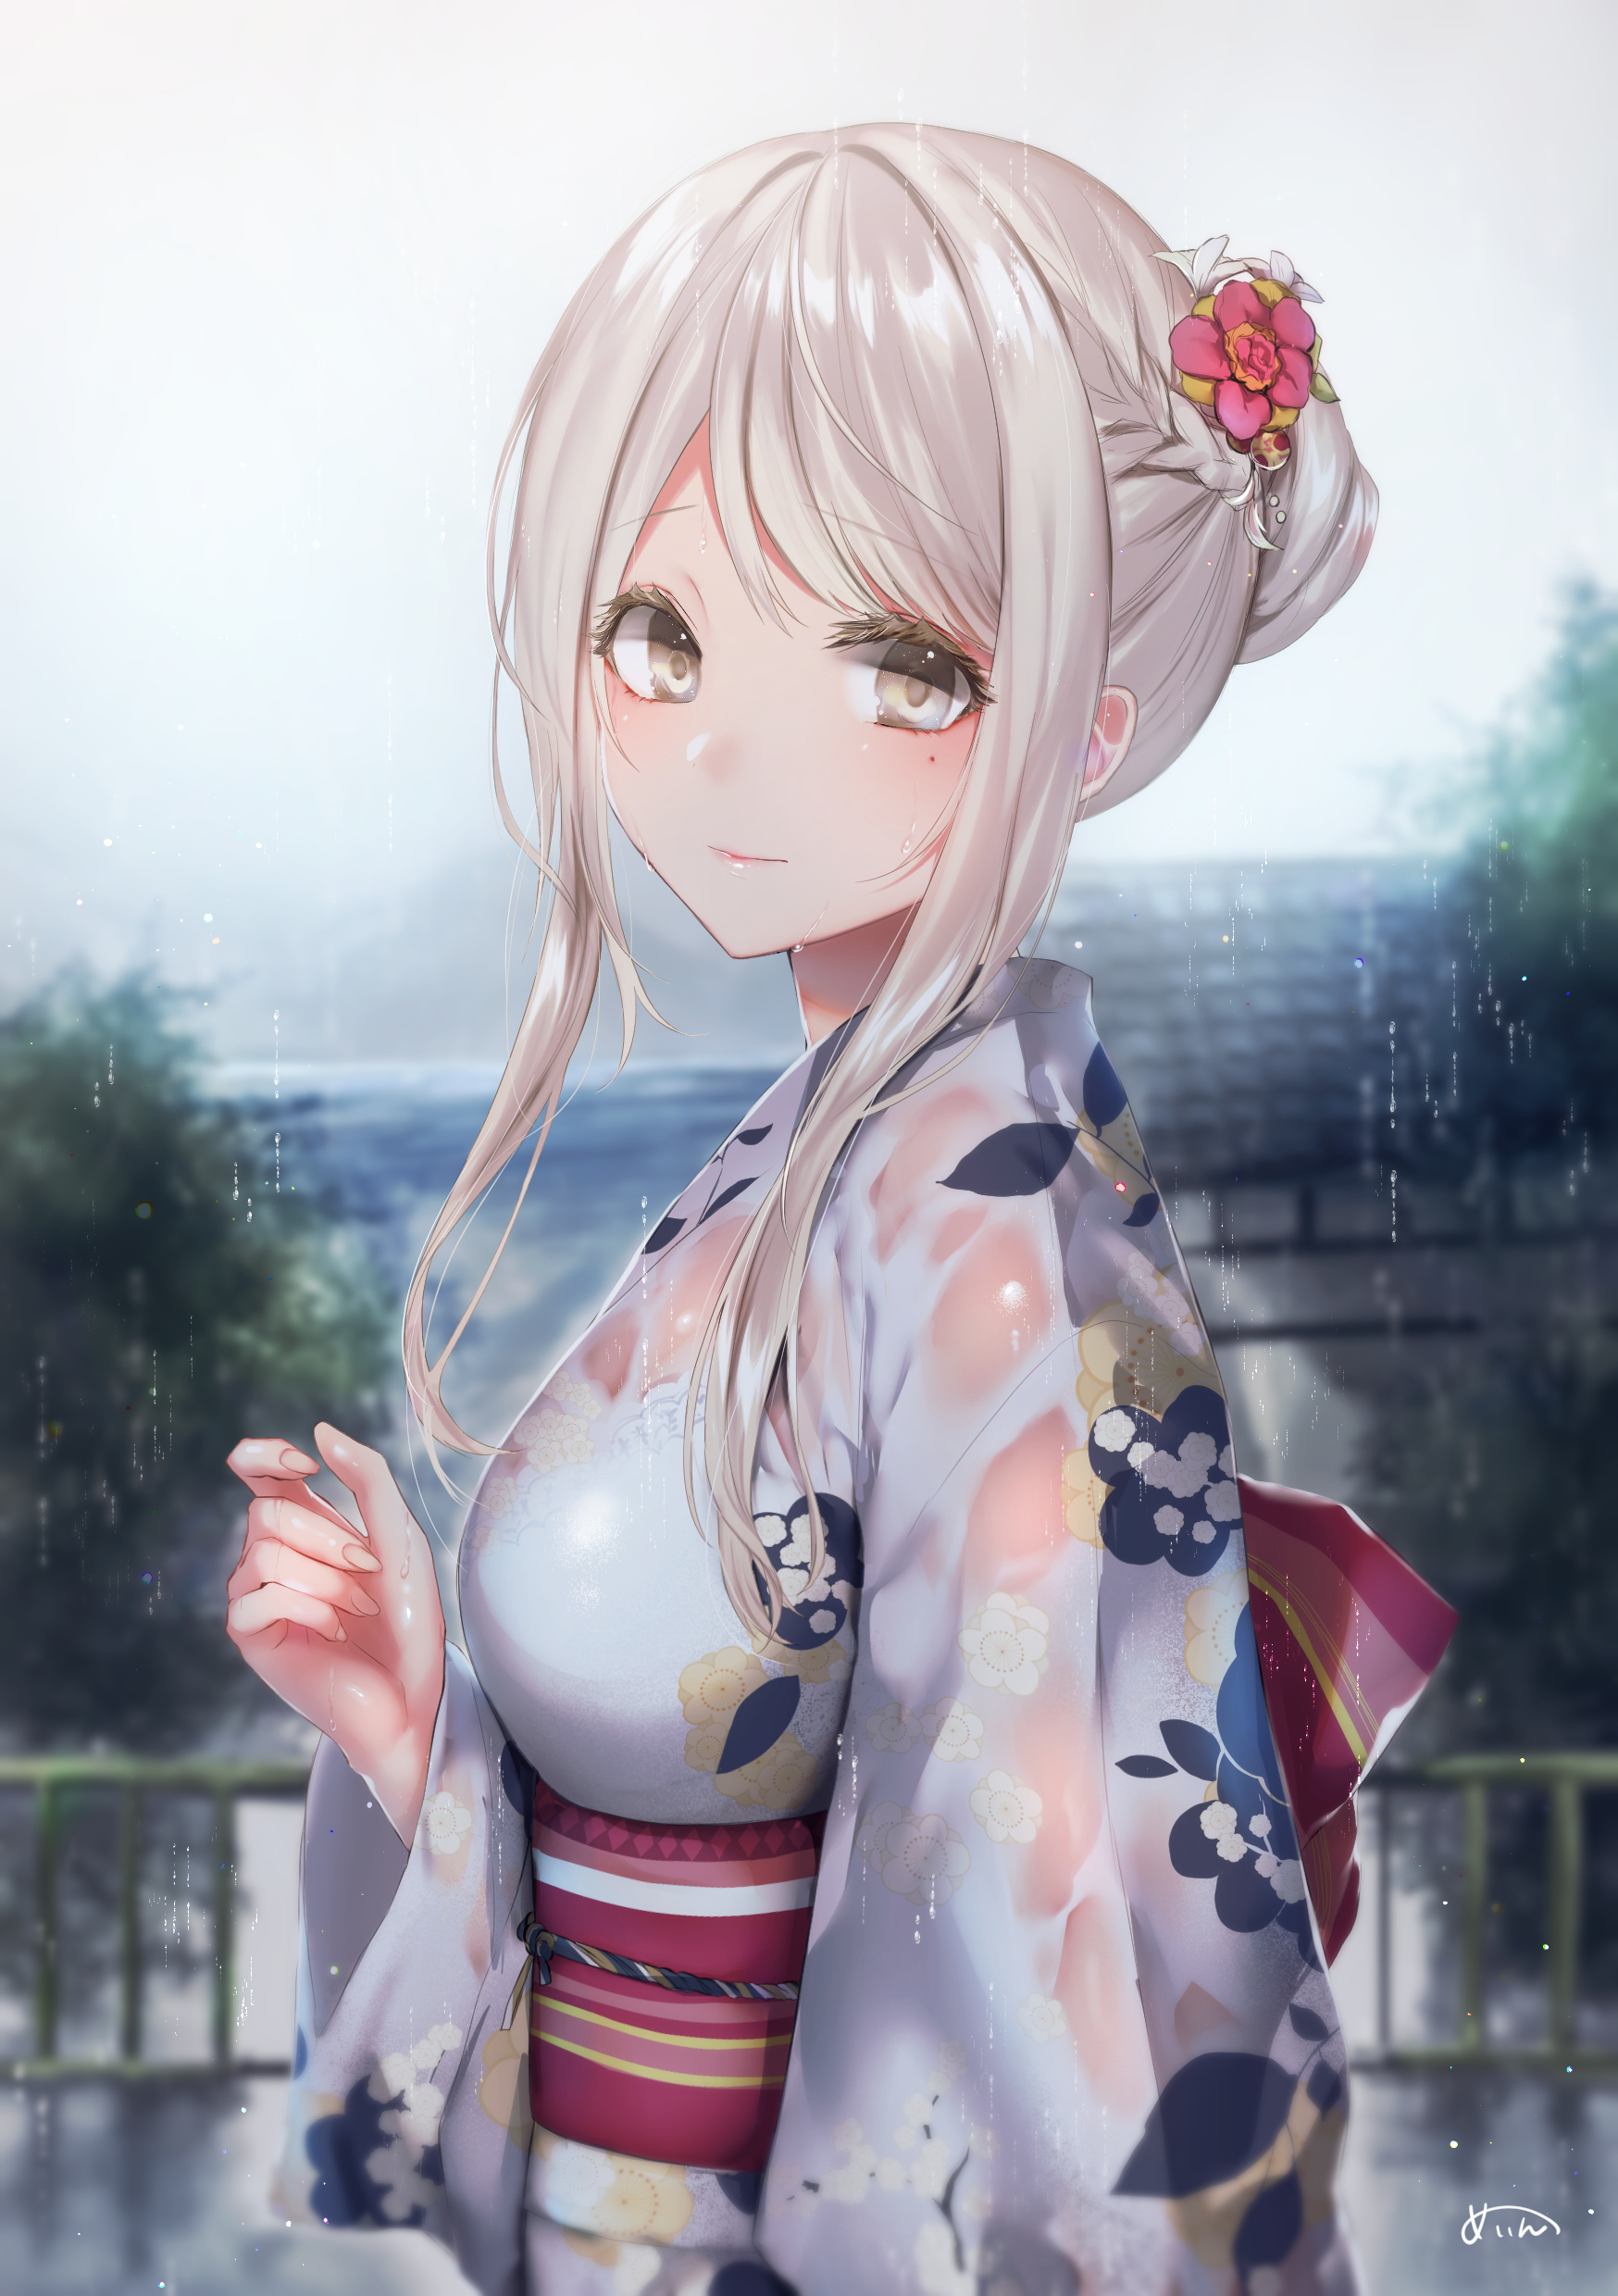 Japanese Clothes Anime Girls Wallpaper - Resolution:1748x2480 - ID:1271997  